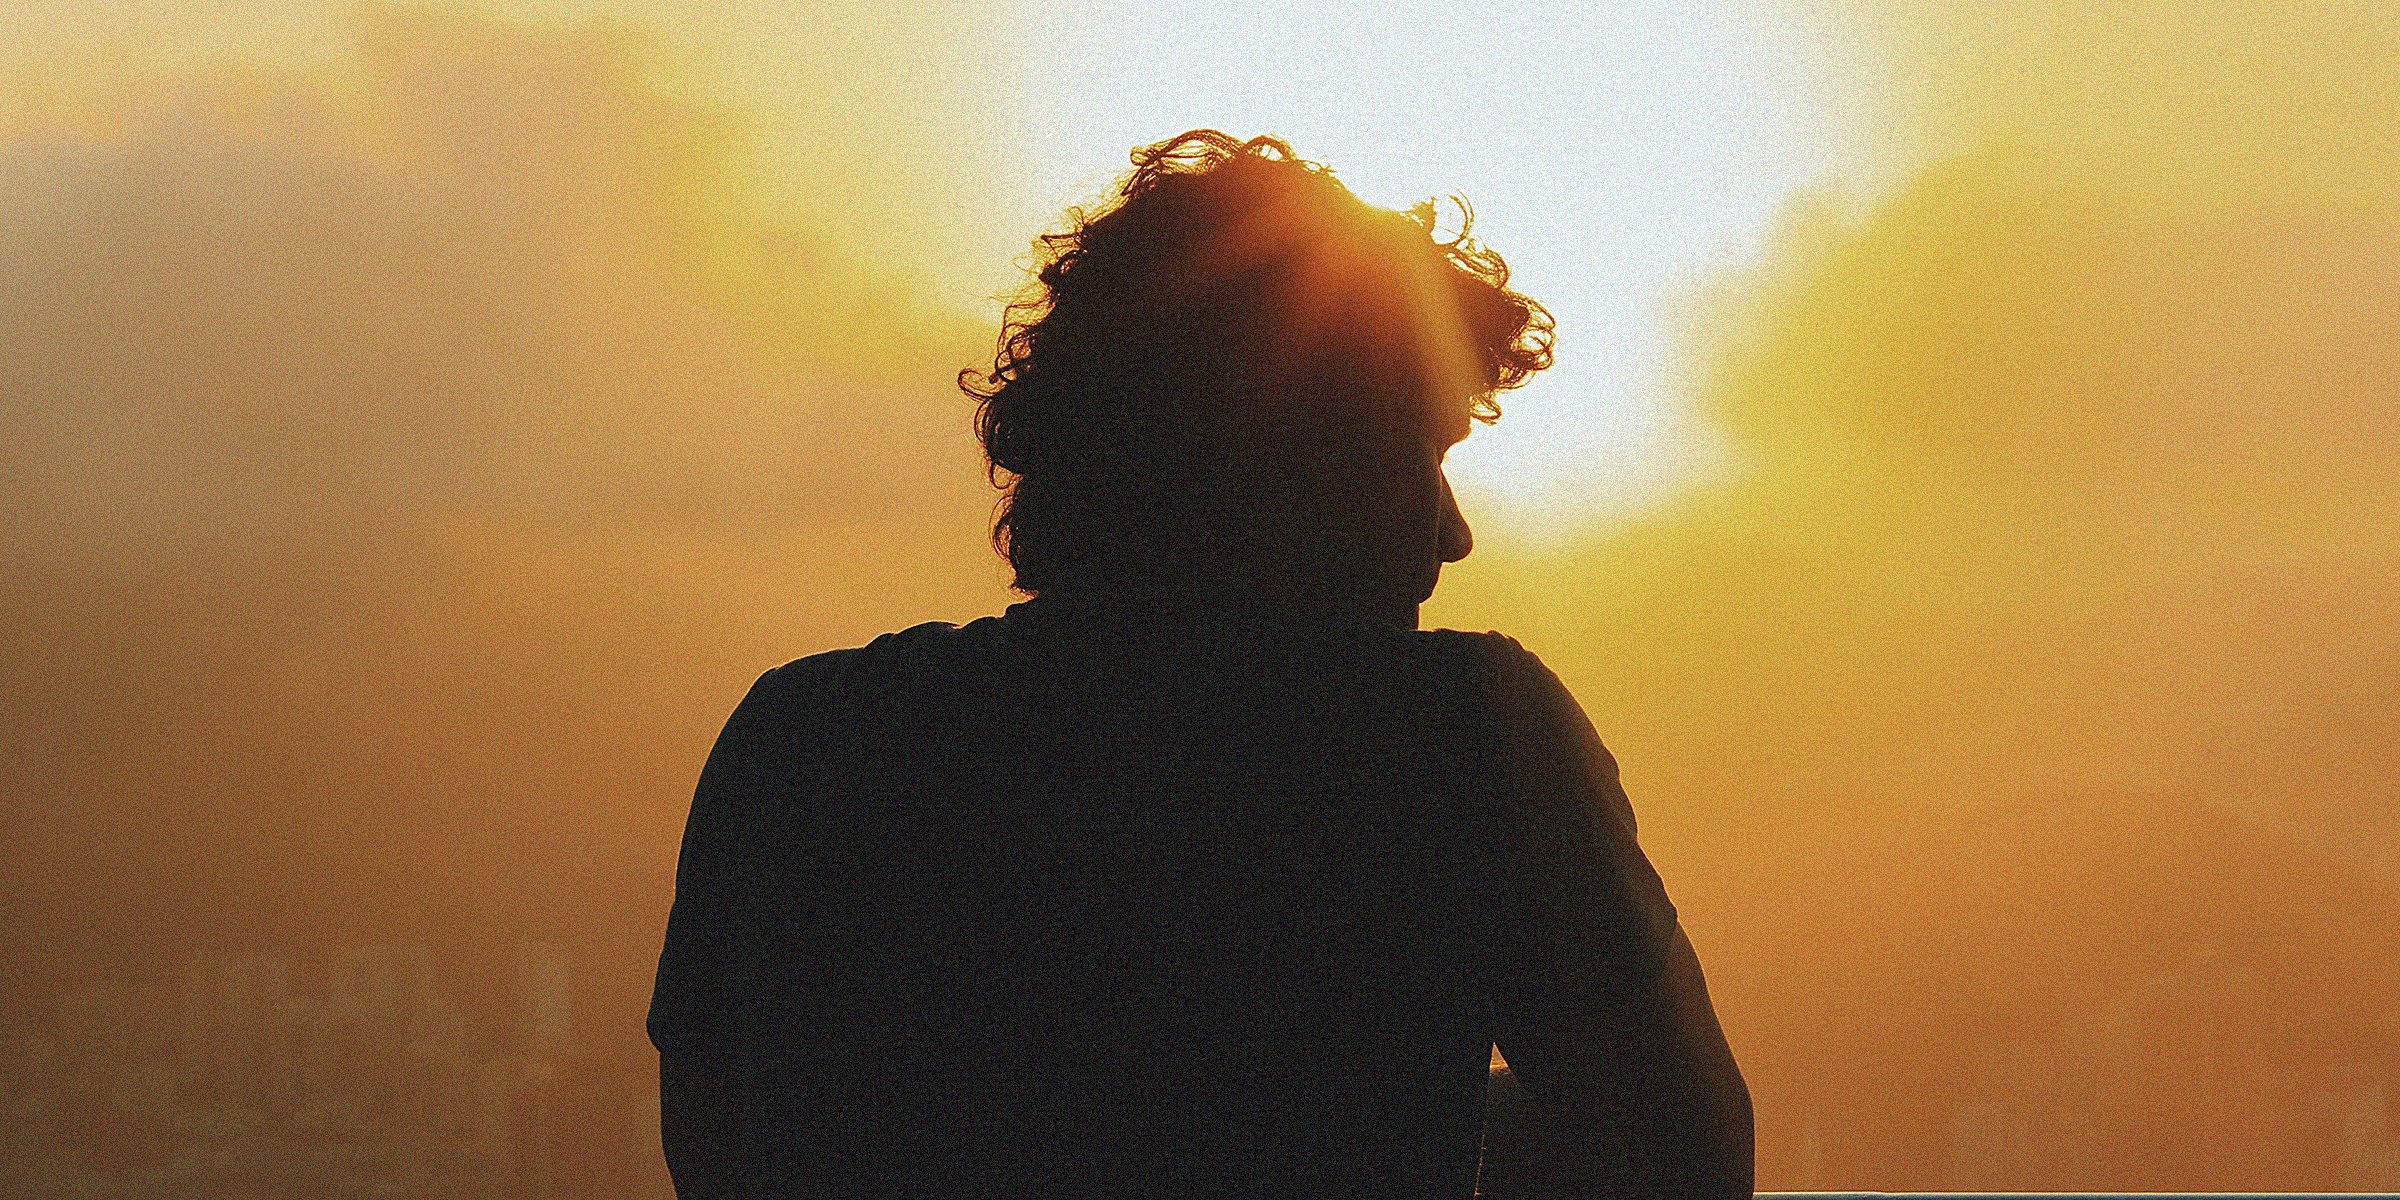 A silhouette of a man in front of a sunrise  | Source :Unsplash